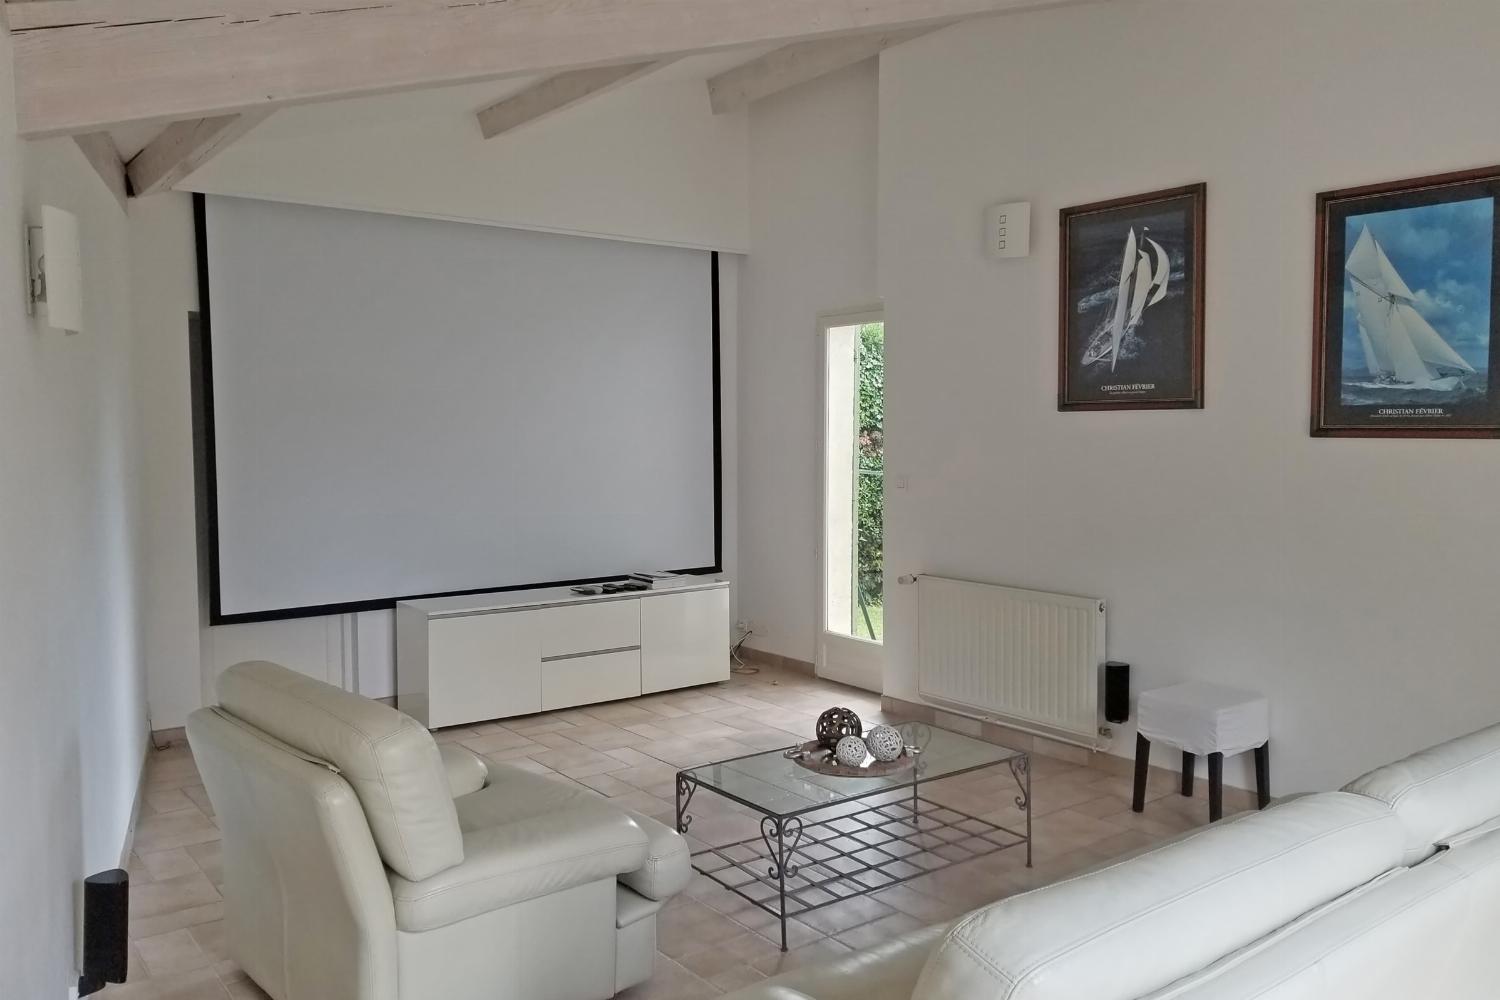 Cinema | Holiday home in Provence